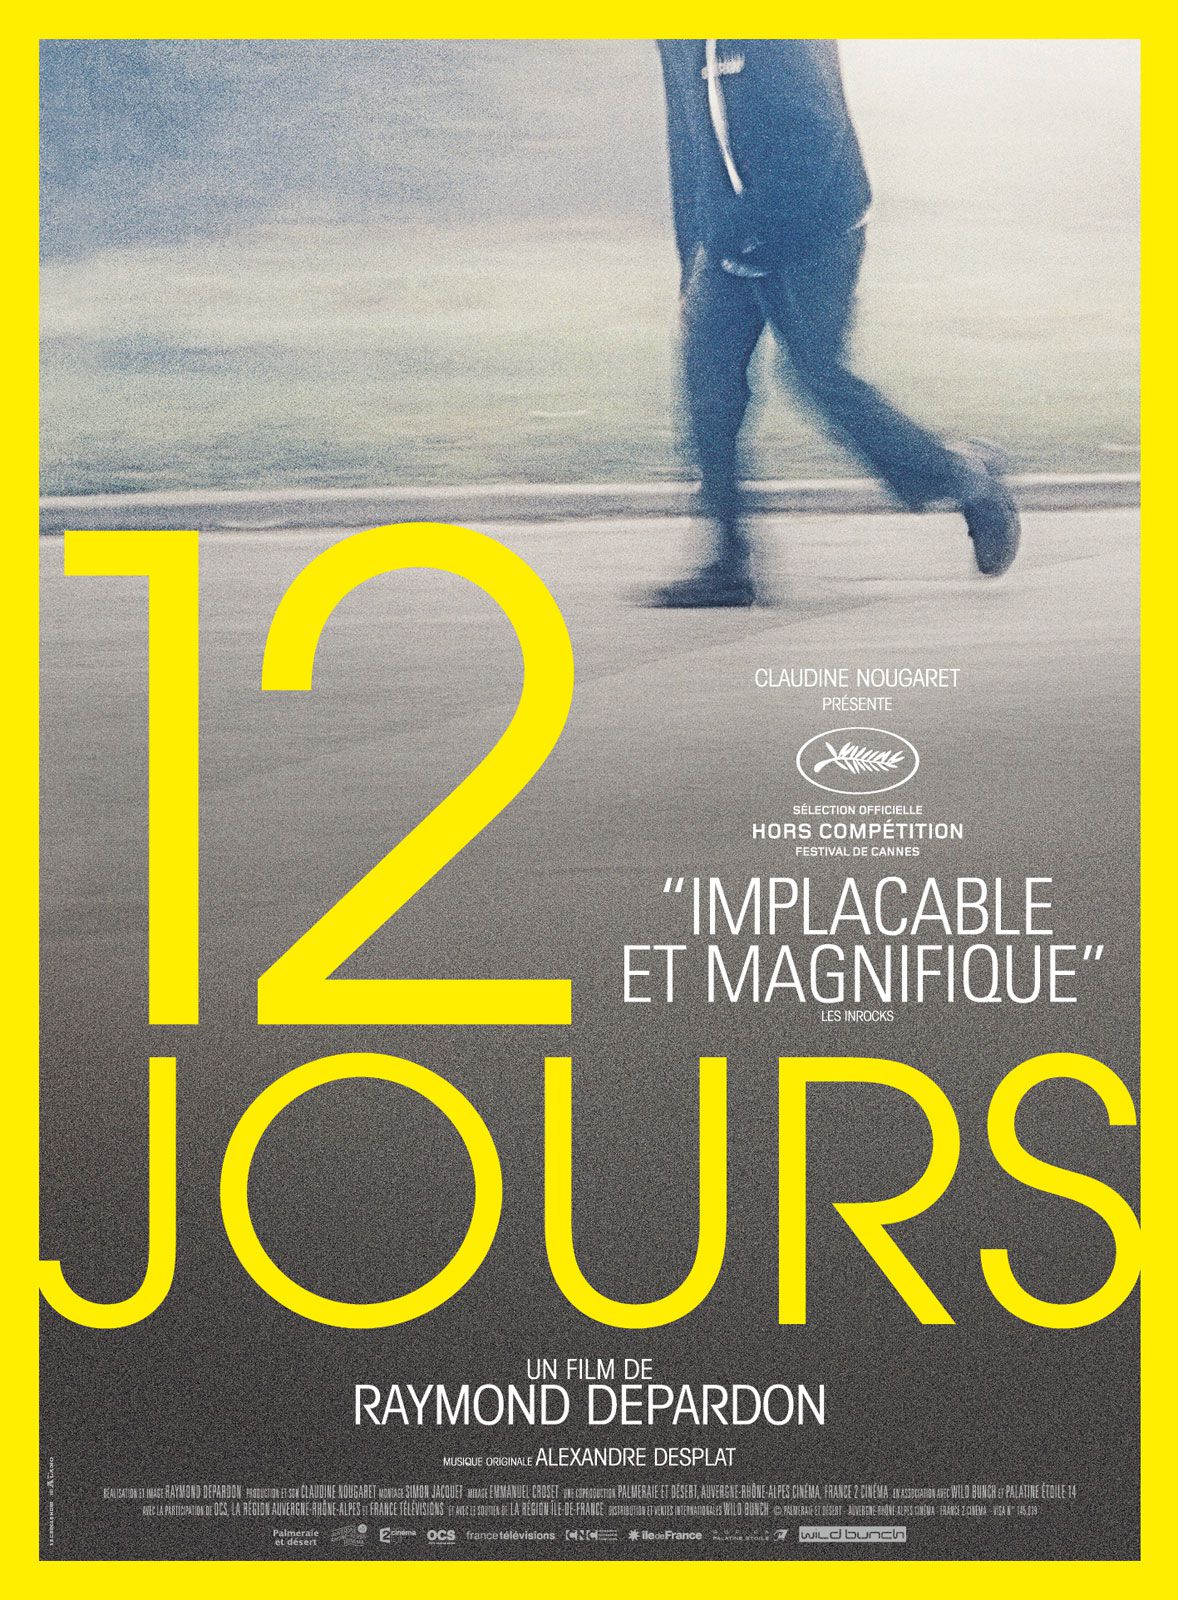 12 jours - Documentaire (2017) streaming VF gratuit complet